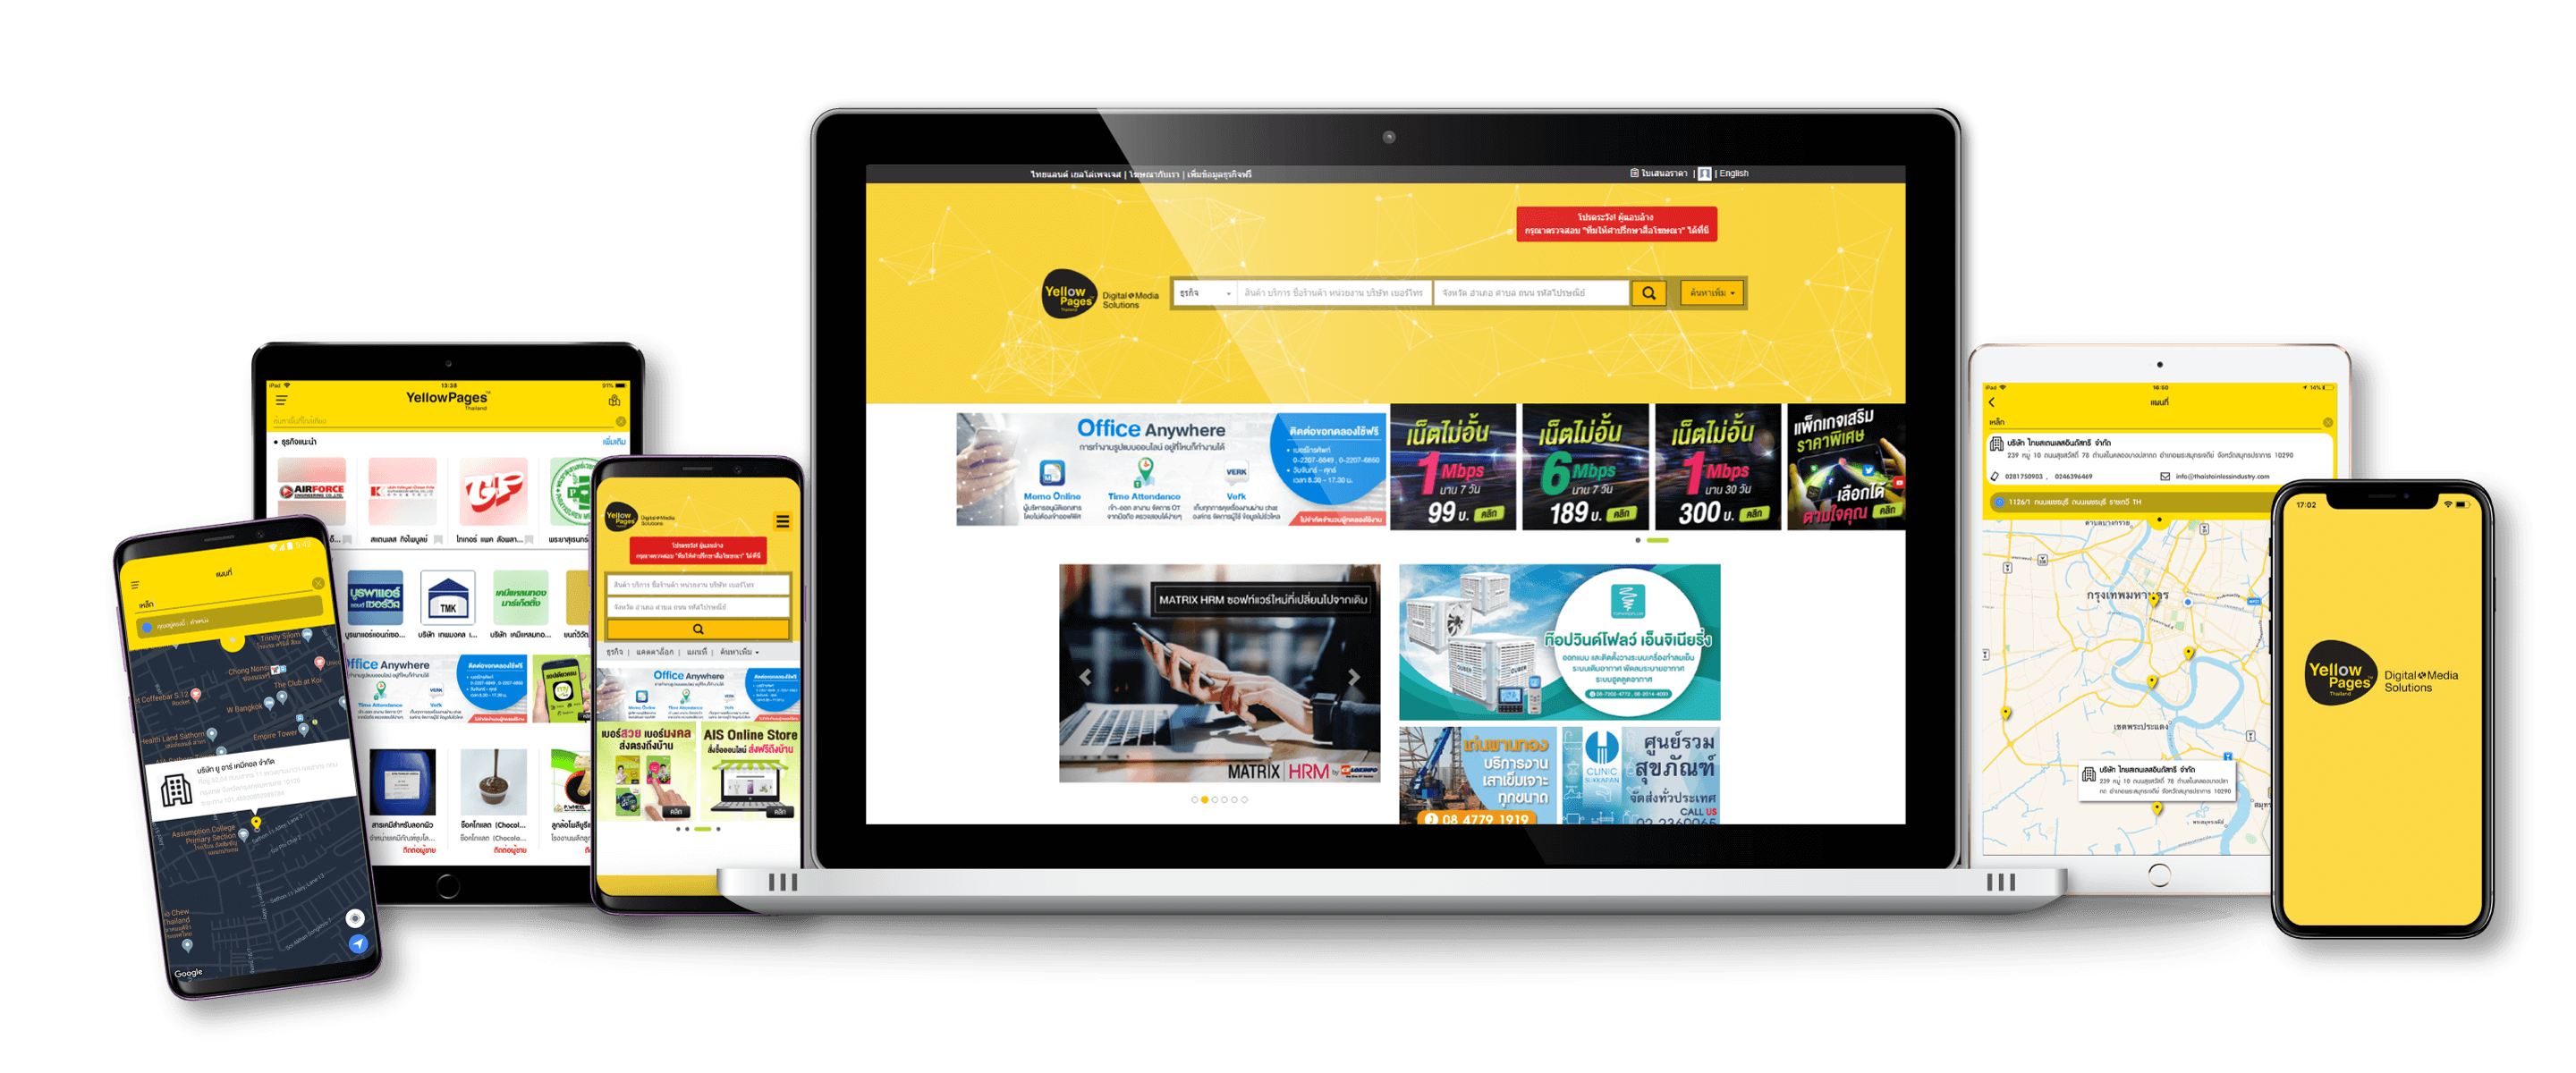 Thailand Yellowpages Digital Products and Services - Devices